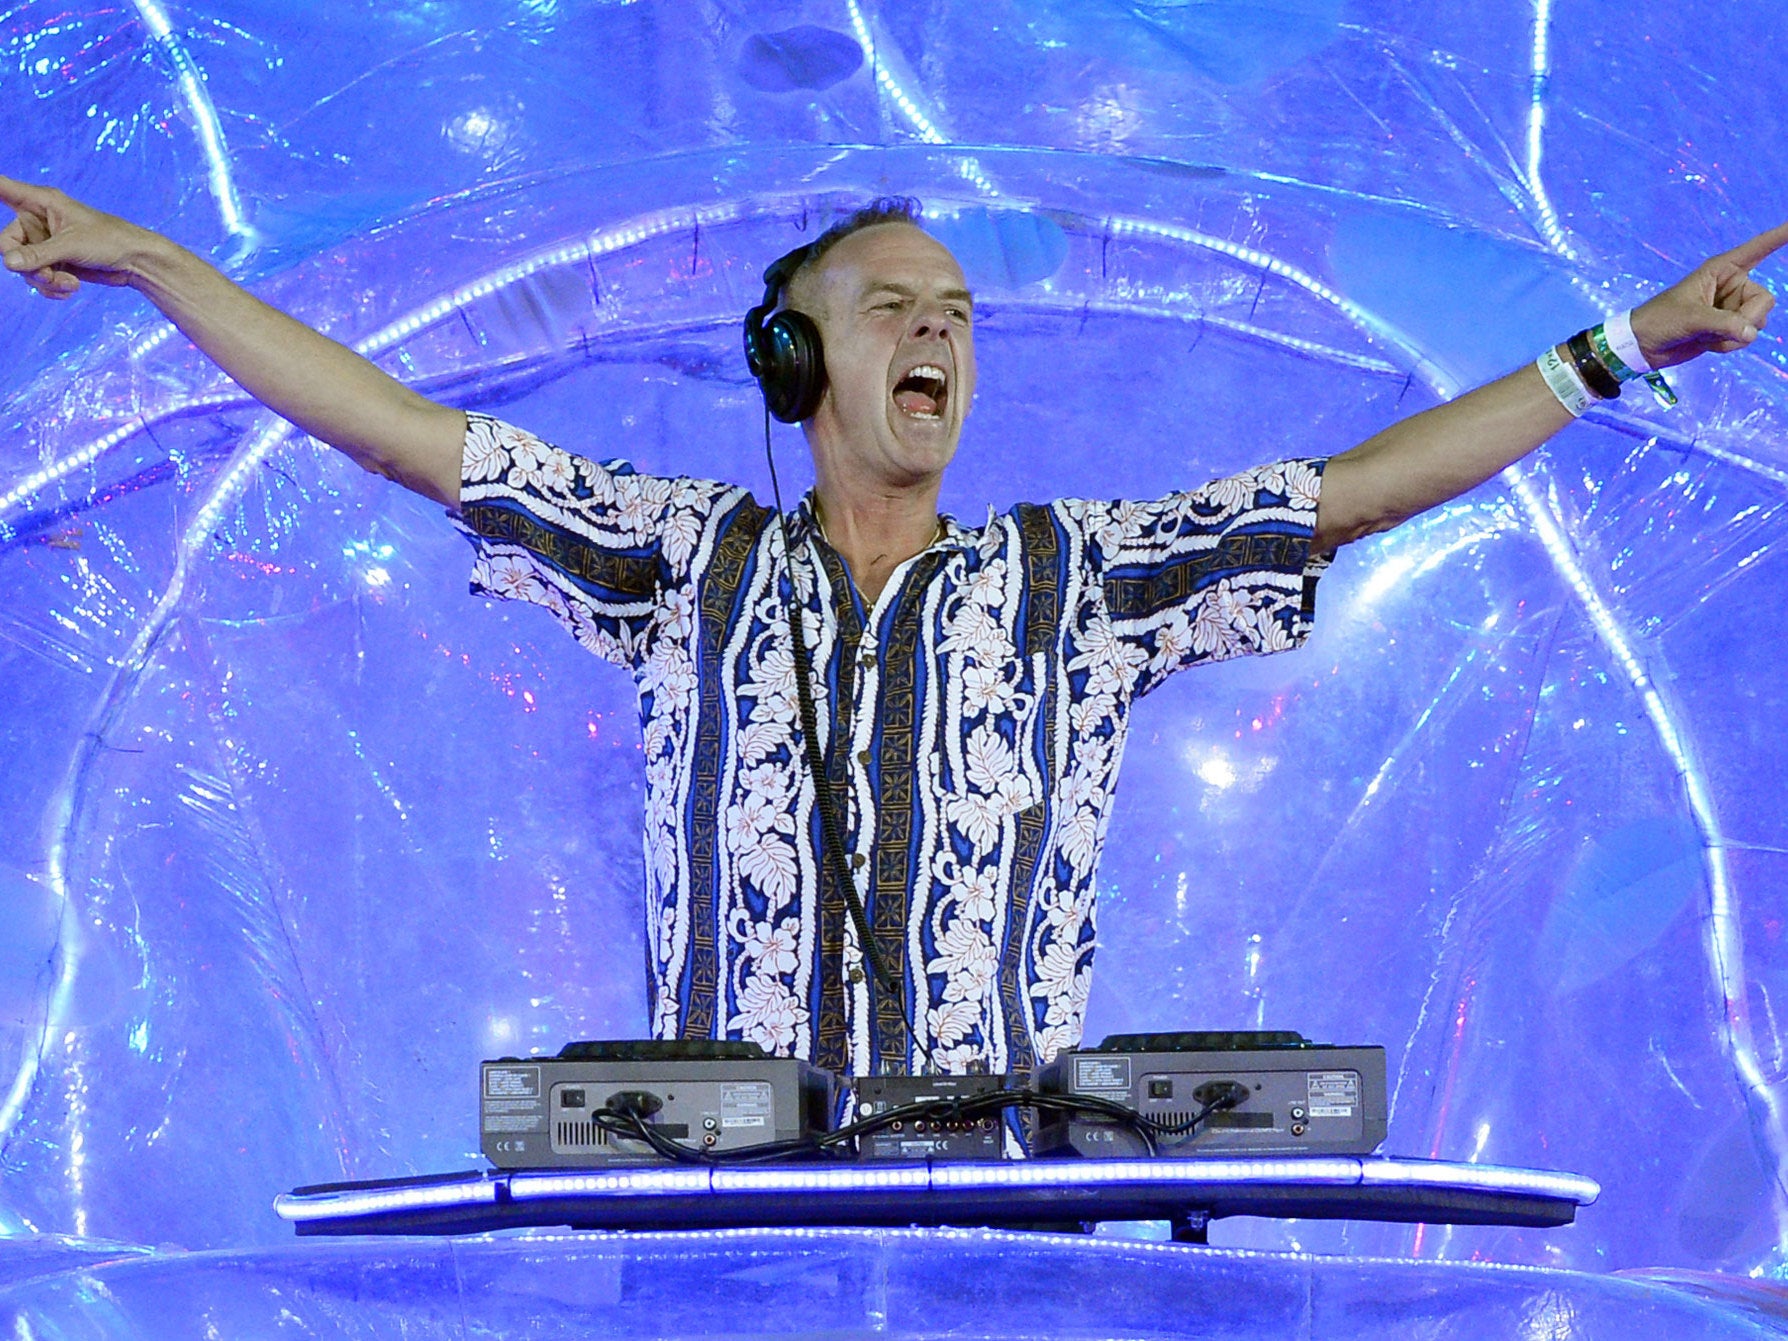 Fatboy Slim (real name Norman Cook), seen here performing at the London 2012 closing ceremony